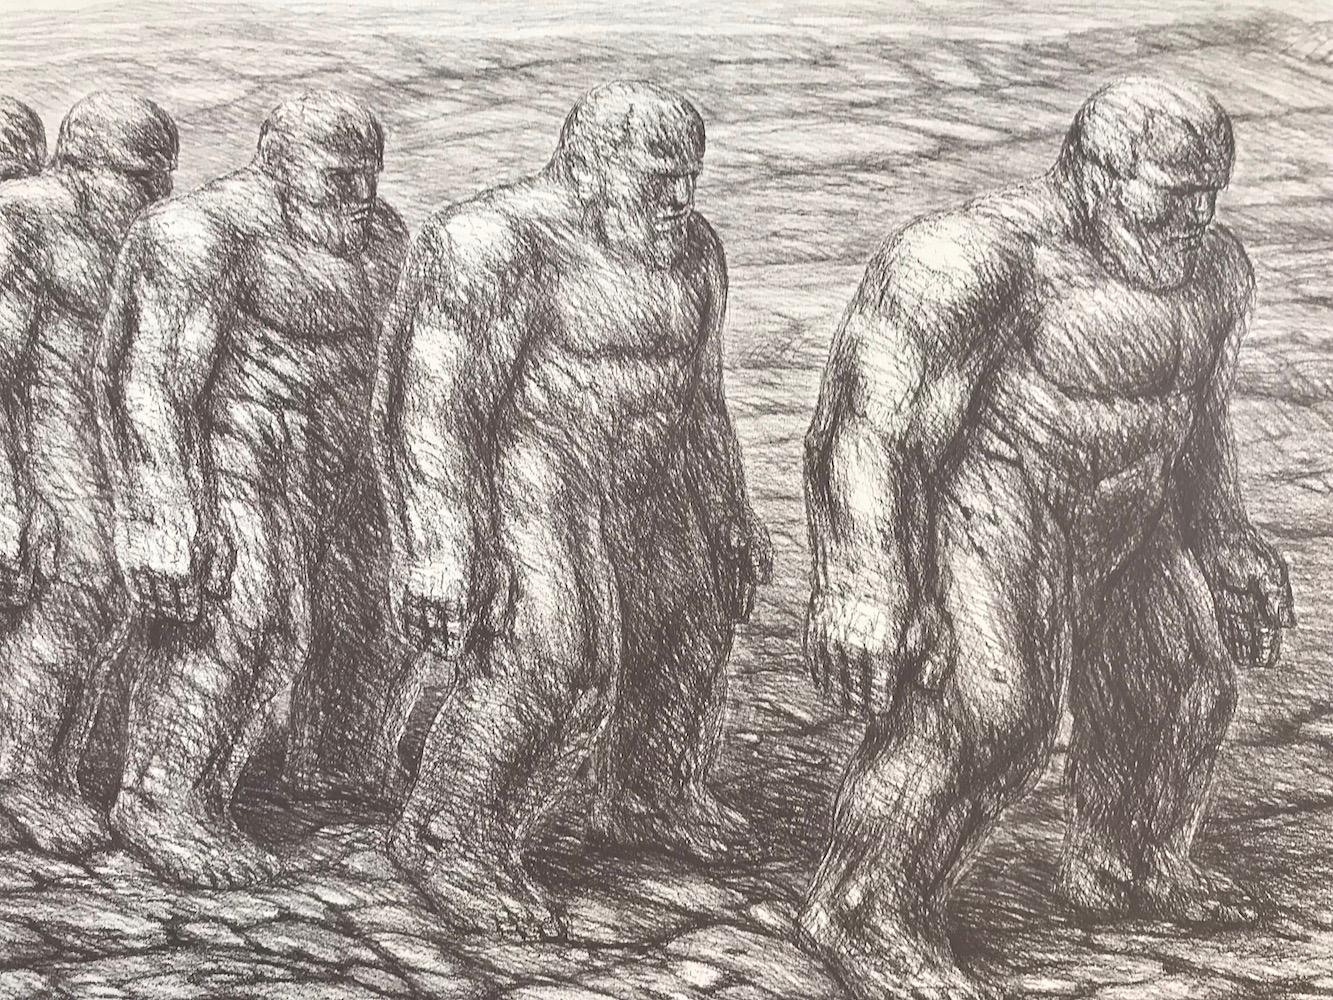 STEPPIN OUT Signed Lithograph, Muscular Stone Men Walking in Line, Sepia Drawing - Print by De Es Schwertberger